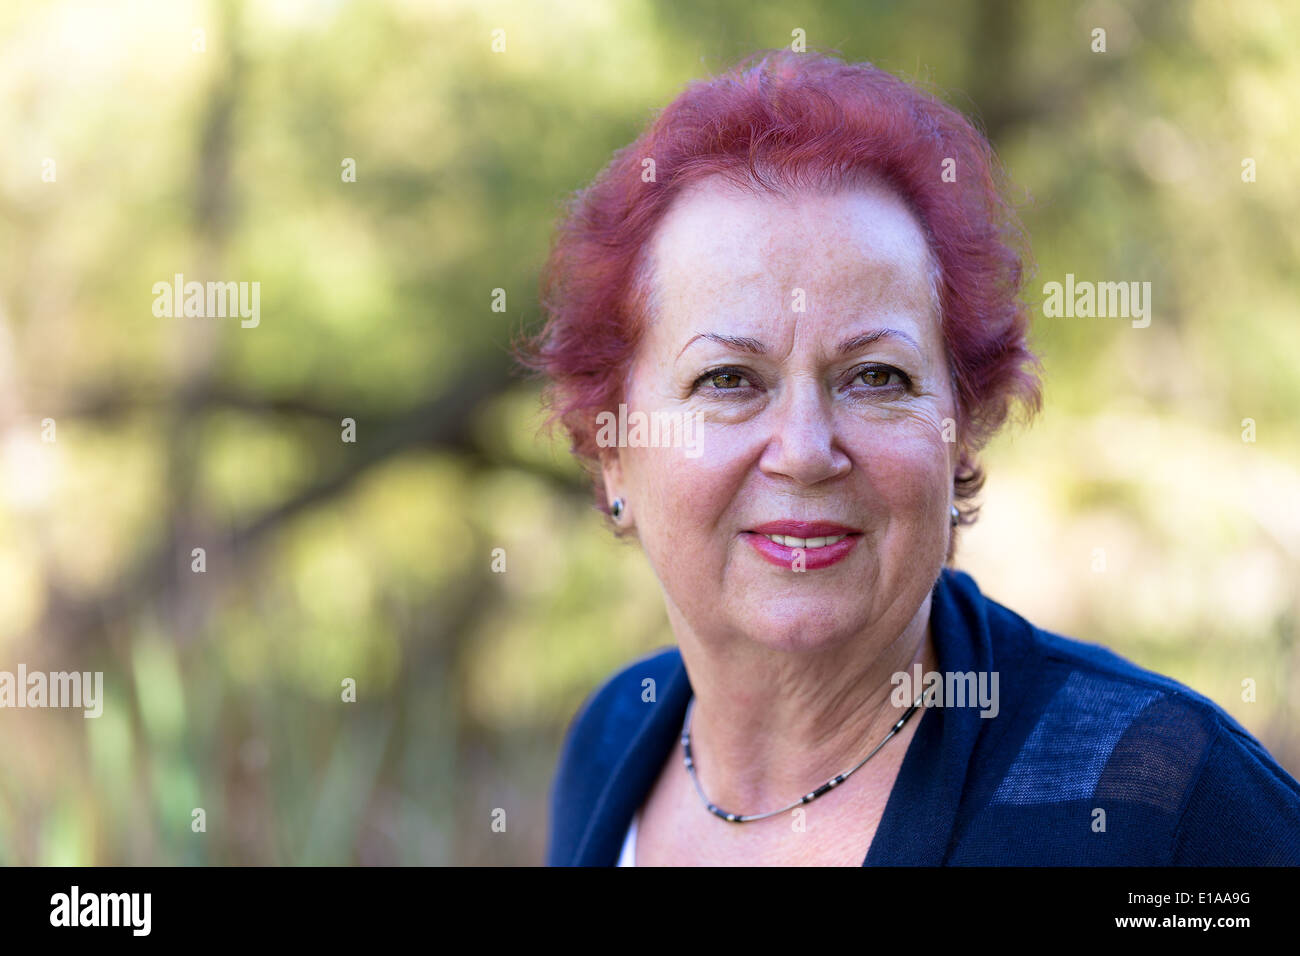 Senior woman giving a genuine, trustful and determined look Stock Photo